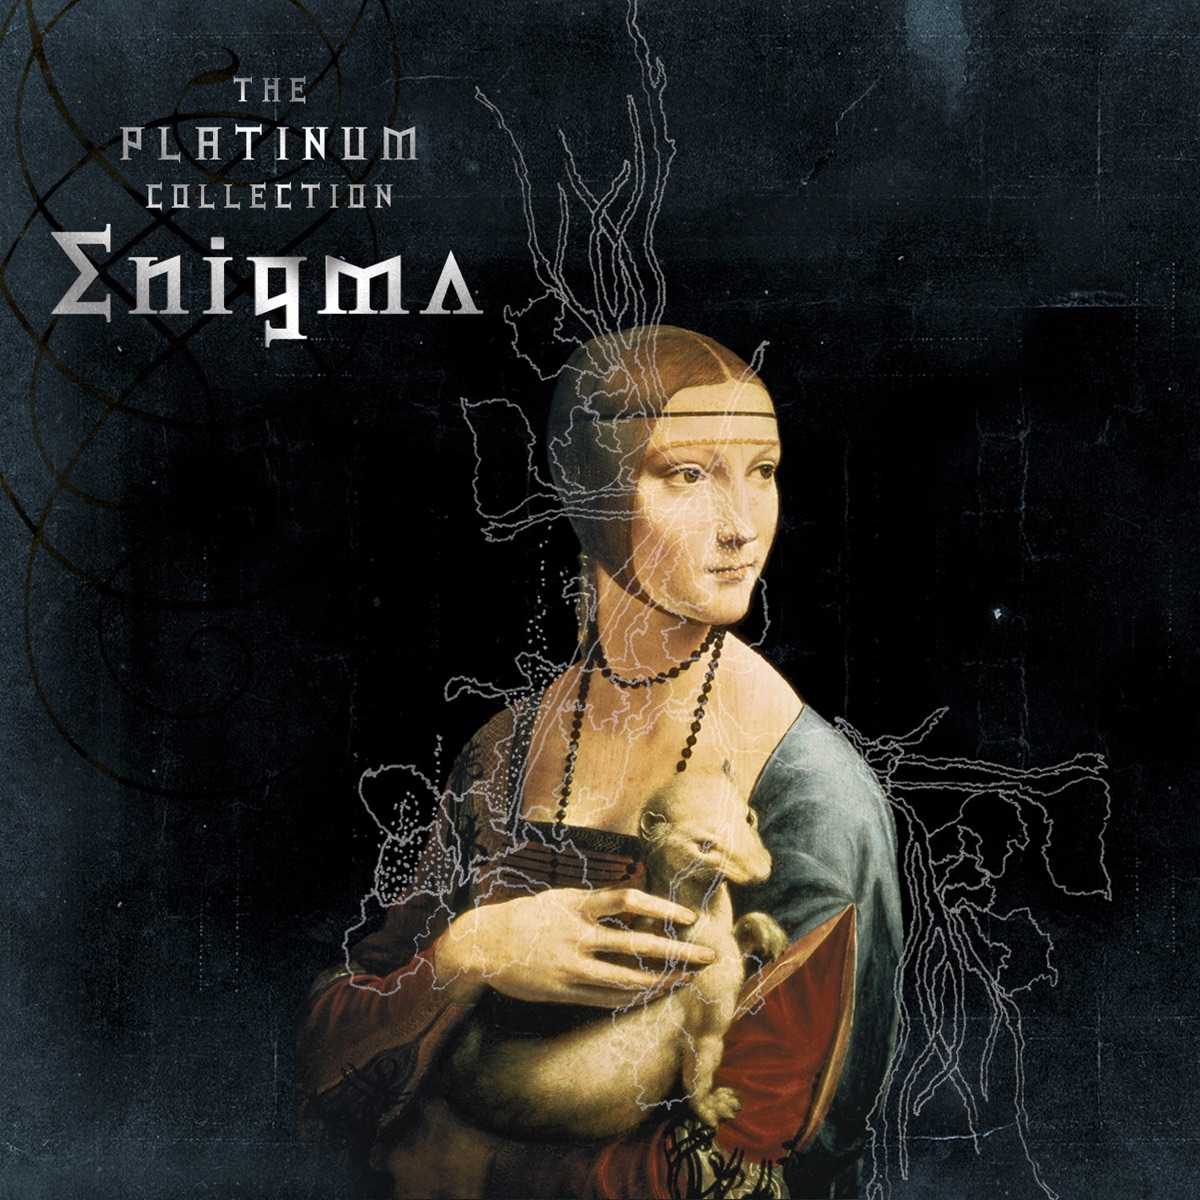 Return to Innocence - EP by Enigma on Apple Music